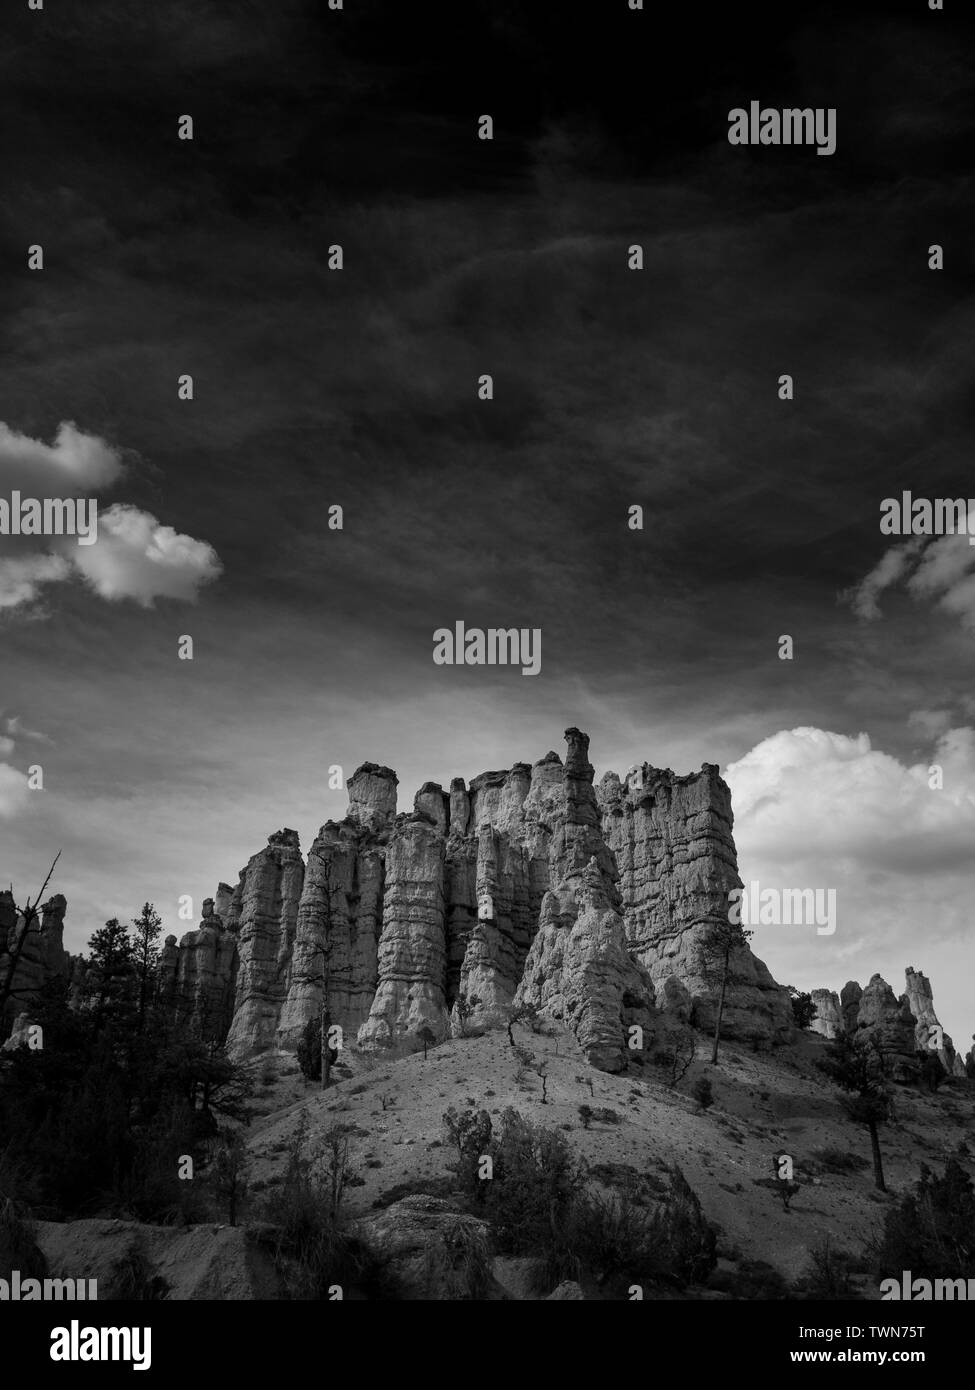 Bryce Canyon National Park, Utah, United States Banque D'Images